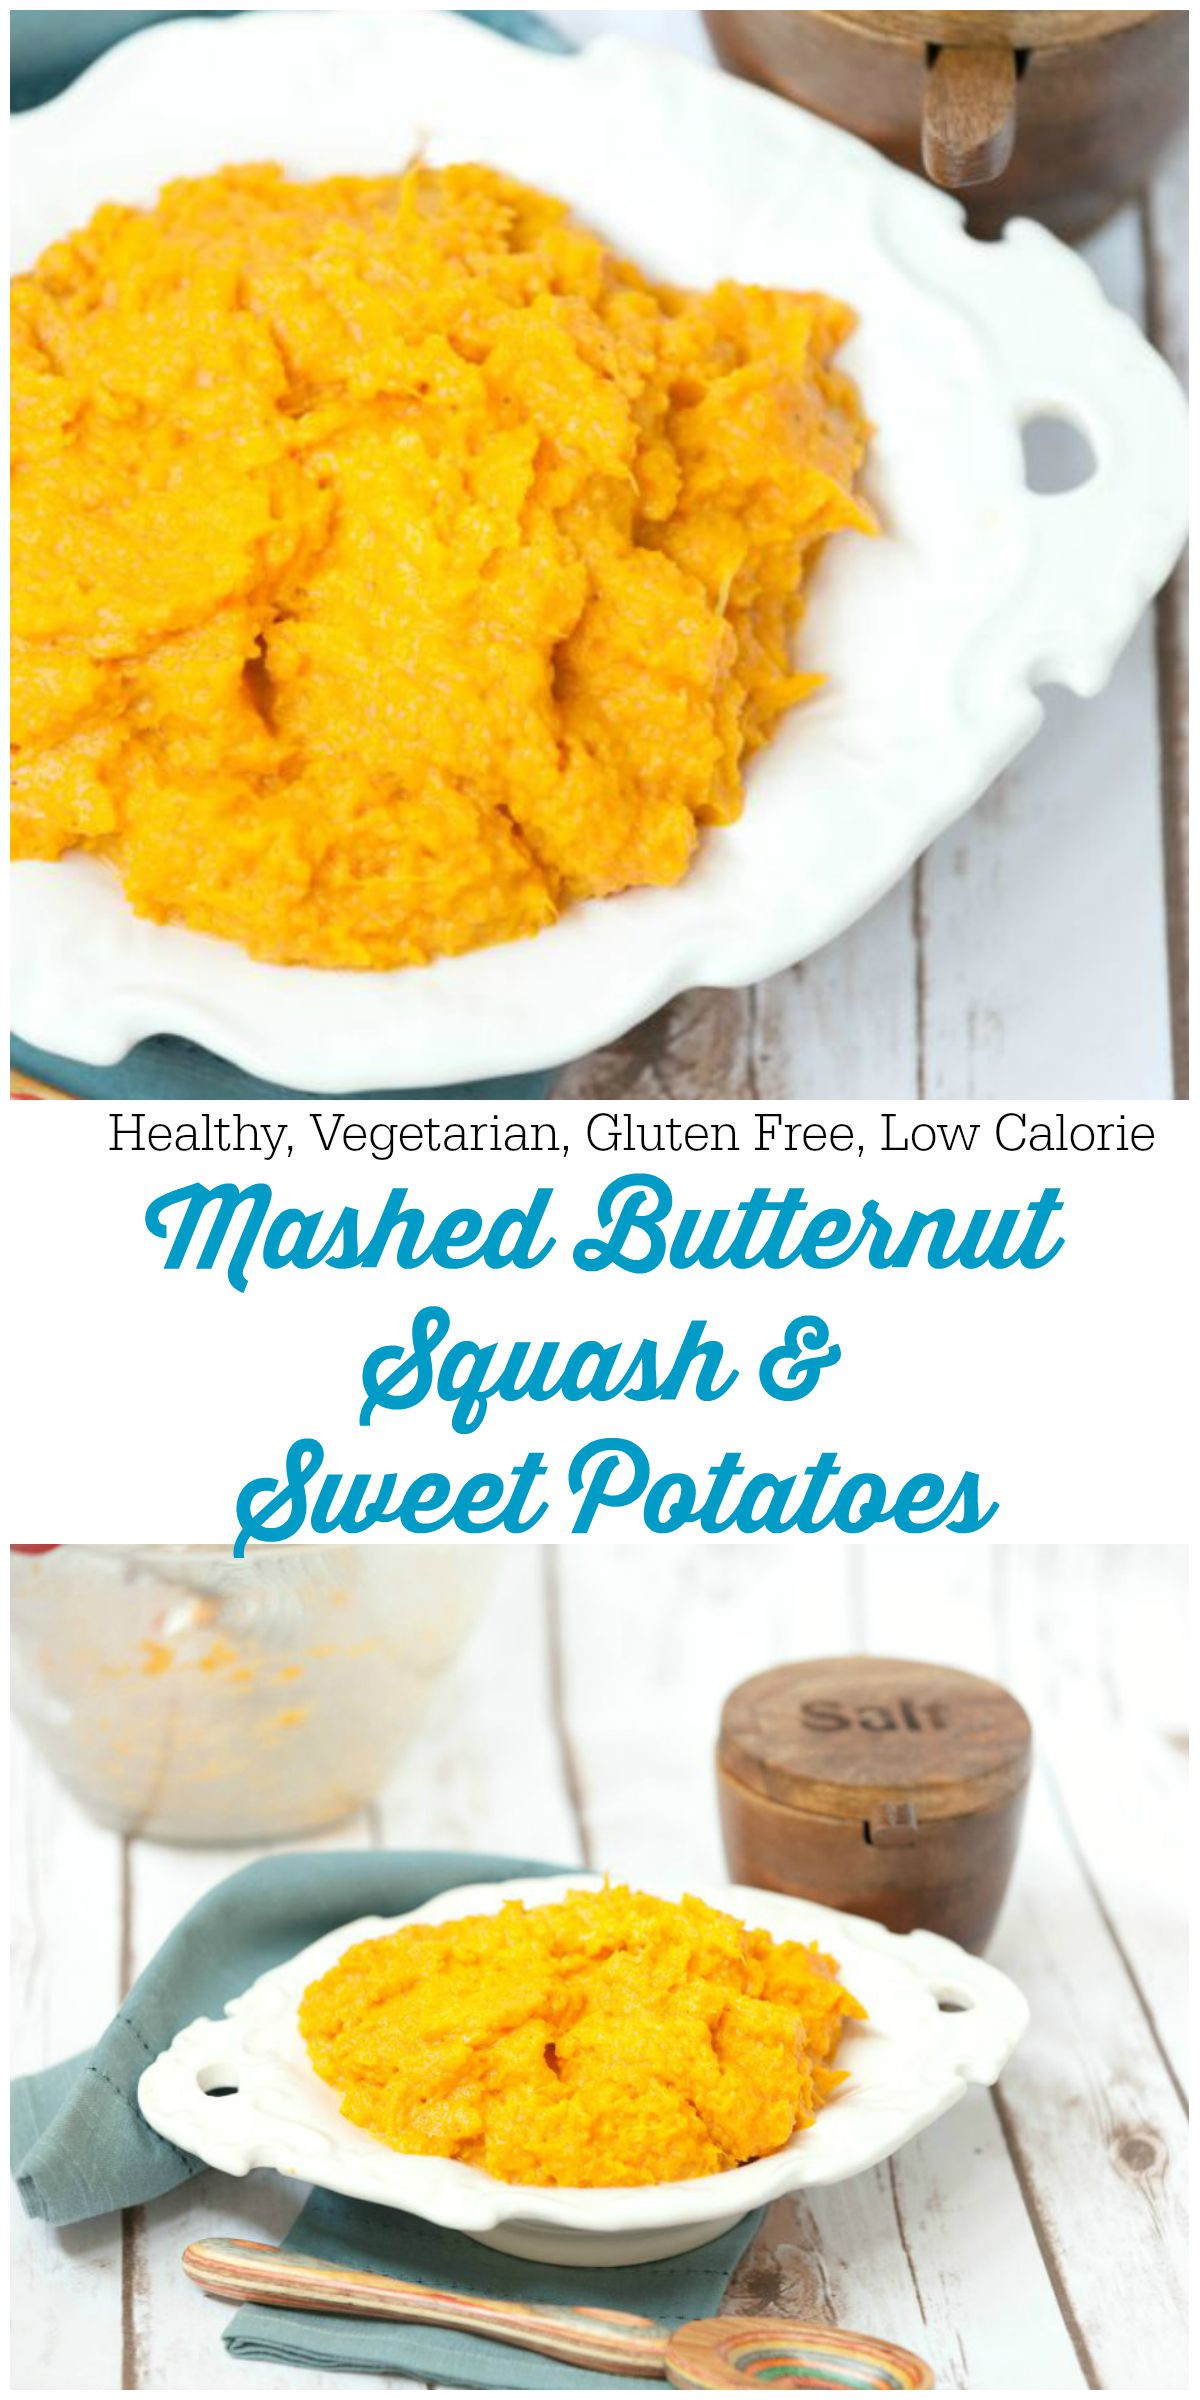 White Sweet Potato Recipes Healthy
 Mashed Butternut Squash and Sweet Potatoes Healthy Low